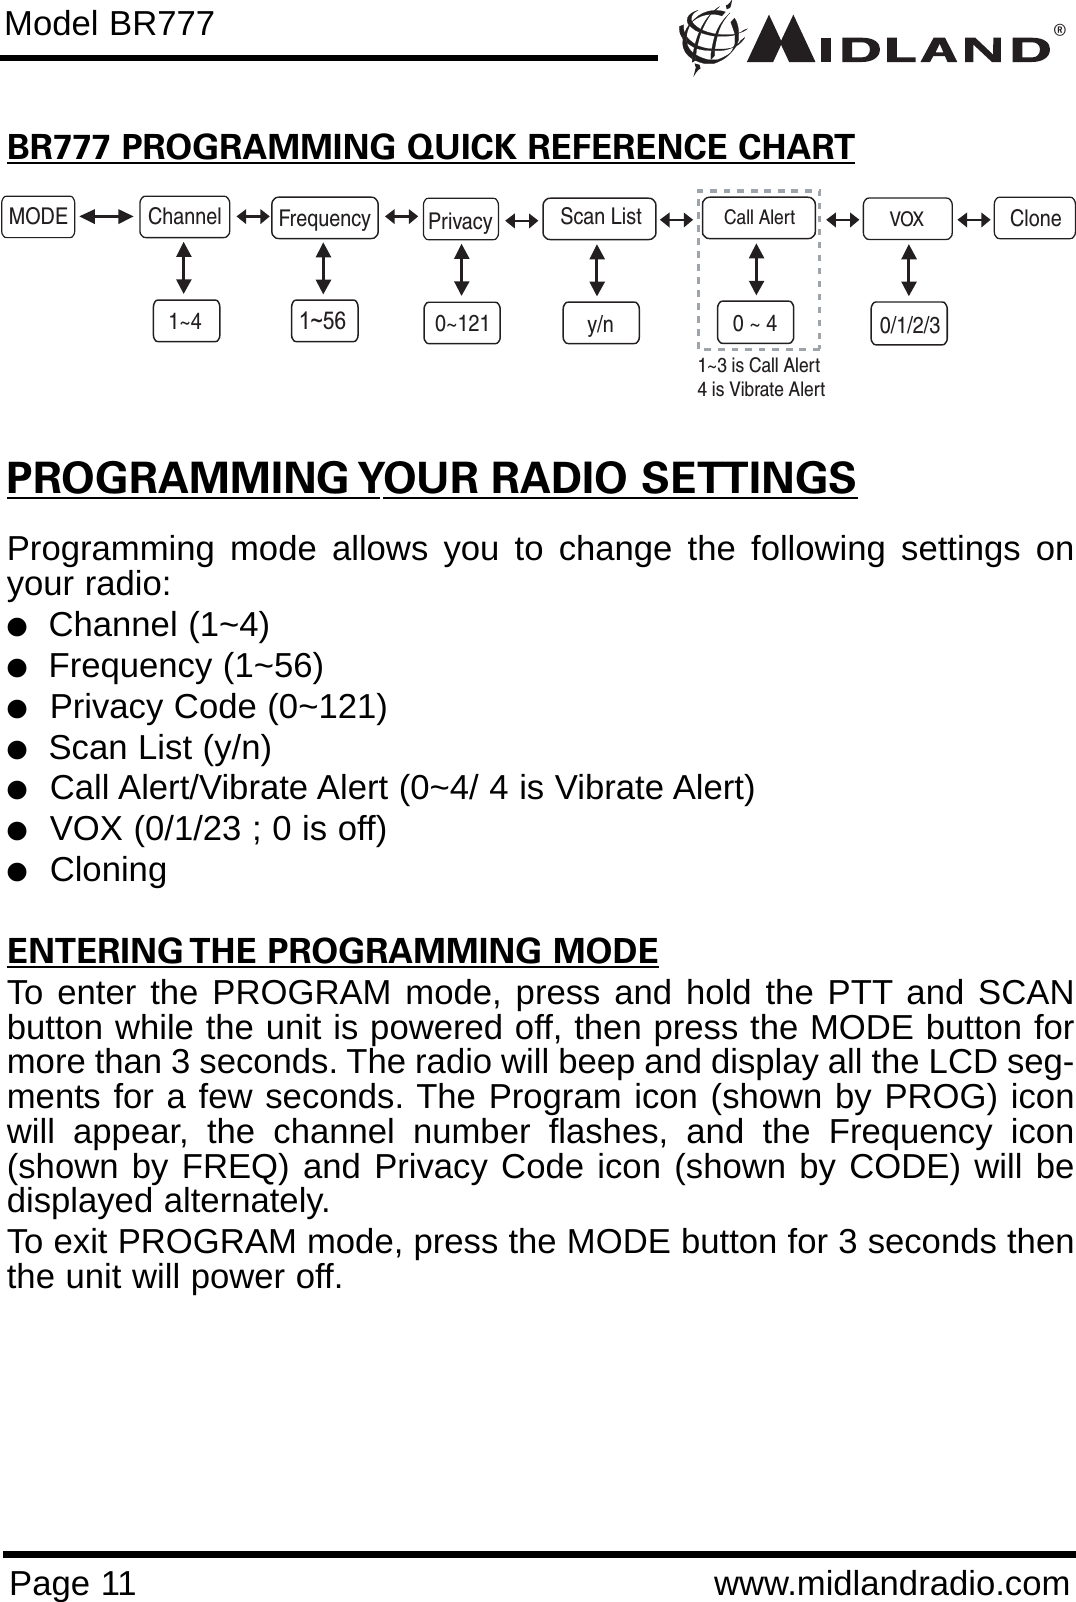 ®Page 11 www.midlandradio.comBR777 PROGRAMMING QUICK REFERENCE CHARTPROGRAMMING YOUR RADIO SETTINGSProgramming mode allows you to change the following settings onyour radio:lChannel (1~4)lFrequency (1~56)lPrivacy Code (0~121)lScan List (y/n)lCall Alert/Vibrate Alert (0~4/ 4 is Vibrate Alert)lVOX (0/1/23 ; 0 is off)lCloningENTERING THE PROGRAMMING MODETo enter the PROGRAM mode, press and hold the PTT and SCANbutton while the unit is powered off, then press the MODE button formore than 3 seconds. The radio will beep and display all the LCD seg-ments for a few seconds. The Program icon (shown by PROG) iconwill appear, the channel number flashes, and the Frequency icon(shown by FREQ) and Privacy Code icon (shown by CODE) will bedisplayed alternately.To exit PROGRAM mode, press the MODE button for 3 seconds thenthe unit will power off.Model BR777MODE Channel1~4FrequencyCall Alert0 ~ 4Privacy0~121VOX0/1/2/3CloneScan Listy/n1~561~3 is Call Alert4 is Vibrate Alert